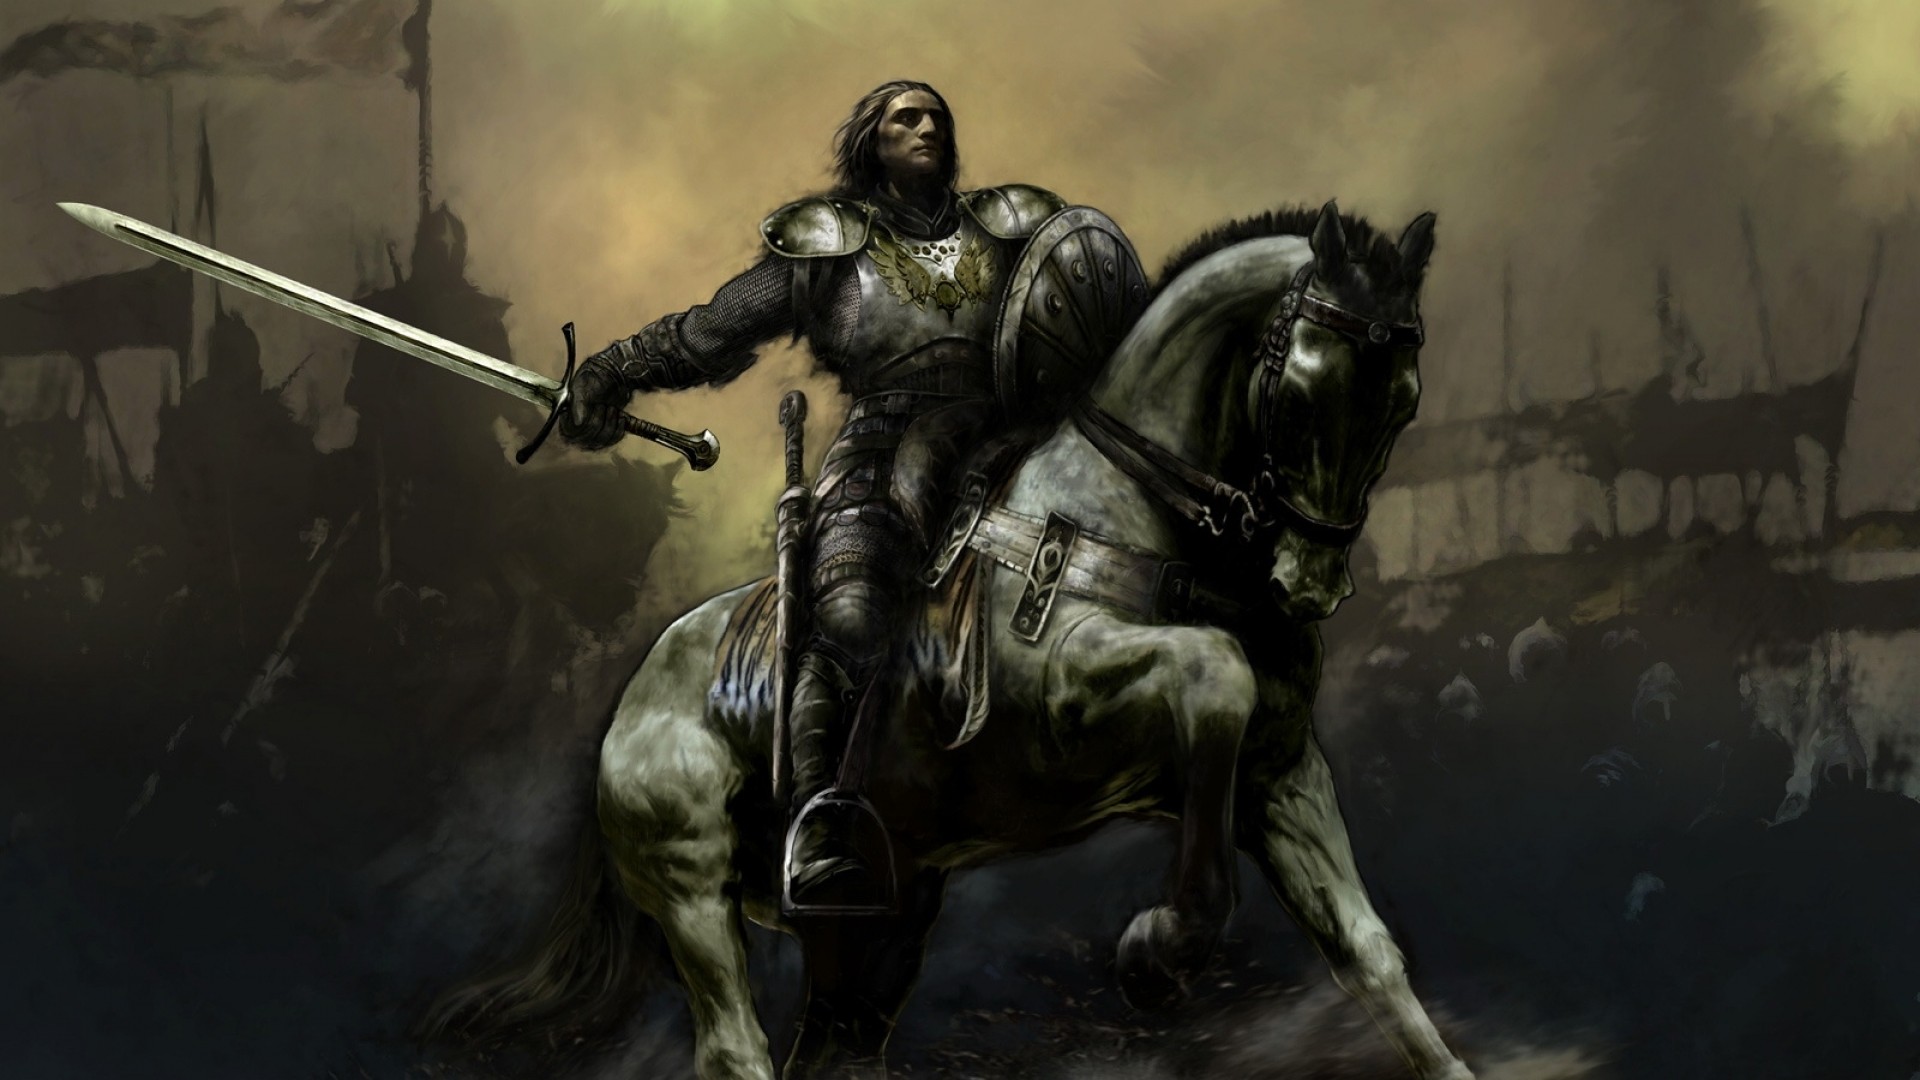 Knight Full HD Wallpaper and Background Image | 1920x1080 | ID:239902